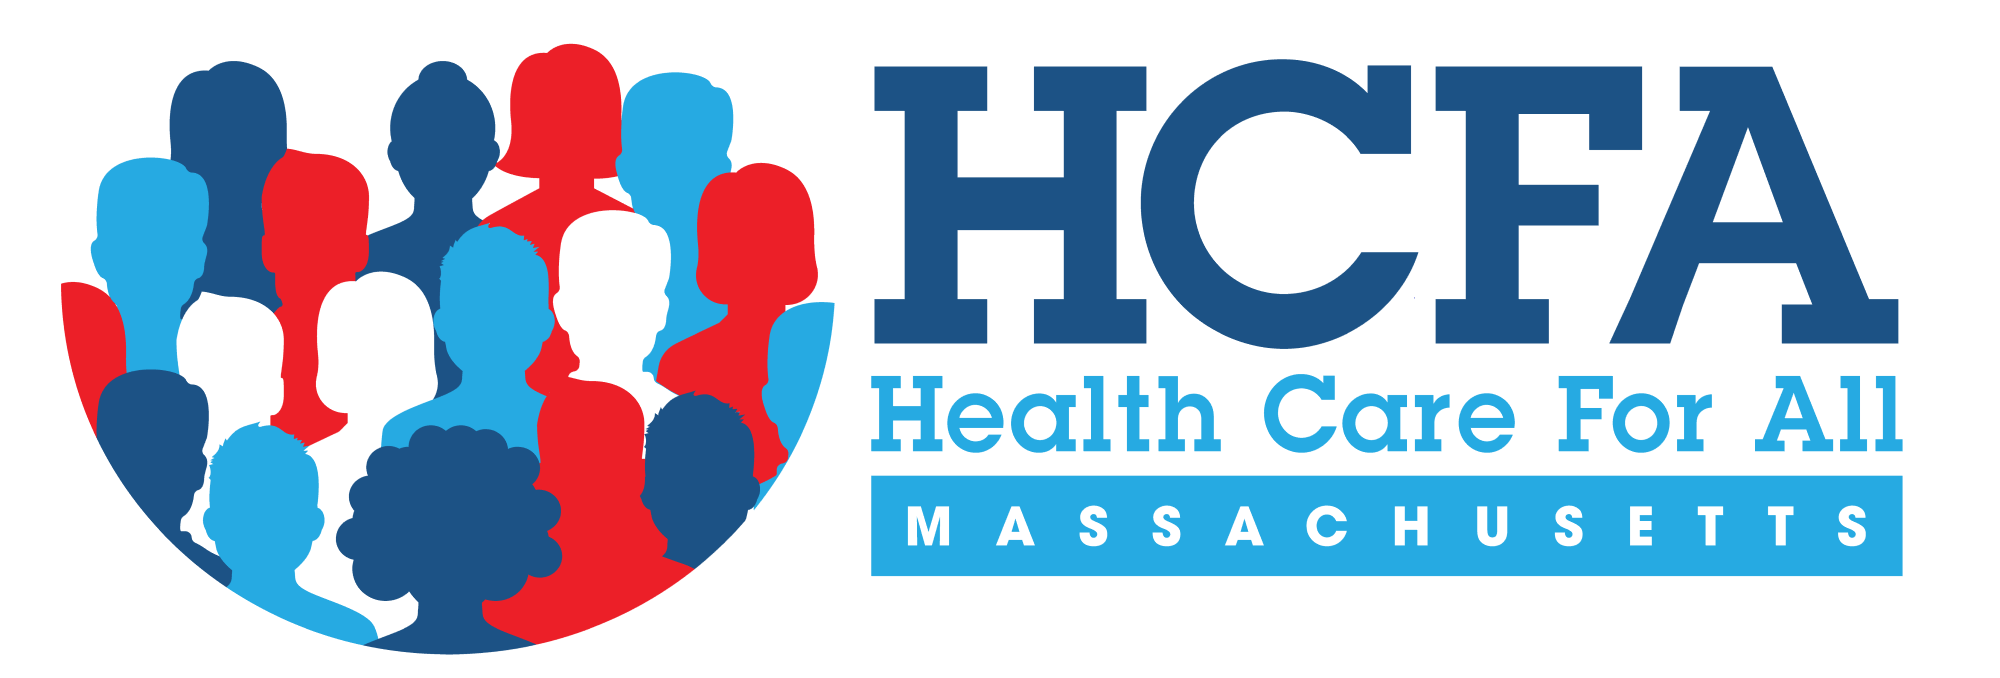 PRESS STATEMENT: Statement from Health Care For All’s Executive Director Amy Rosenthal on Federal Court Decision to Strike Down Mandated No-Cost Preventive Care Procedures